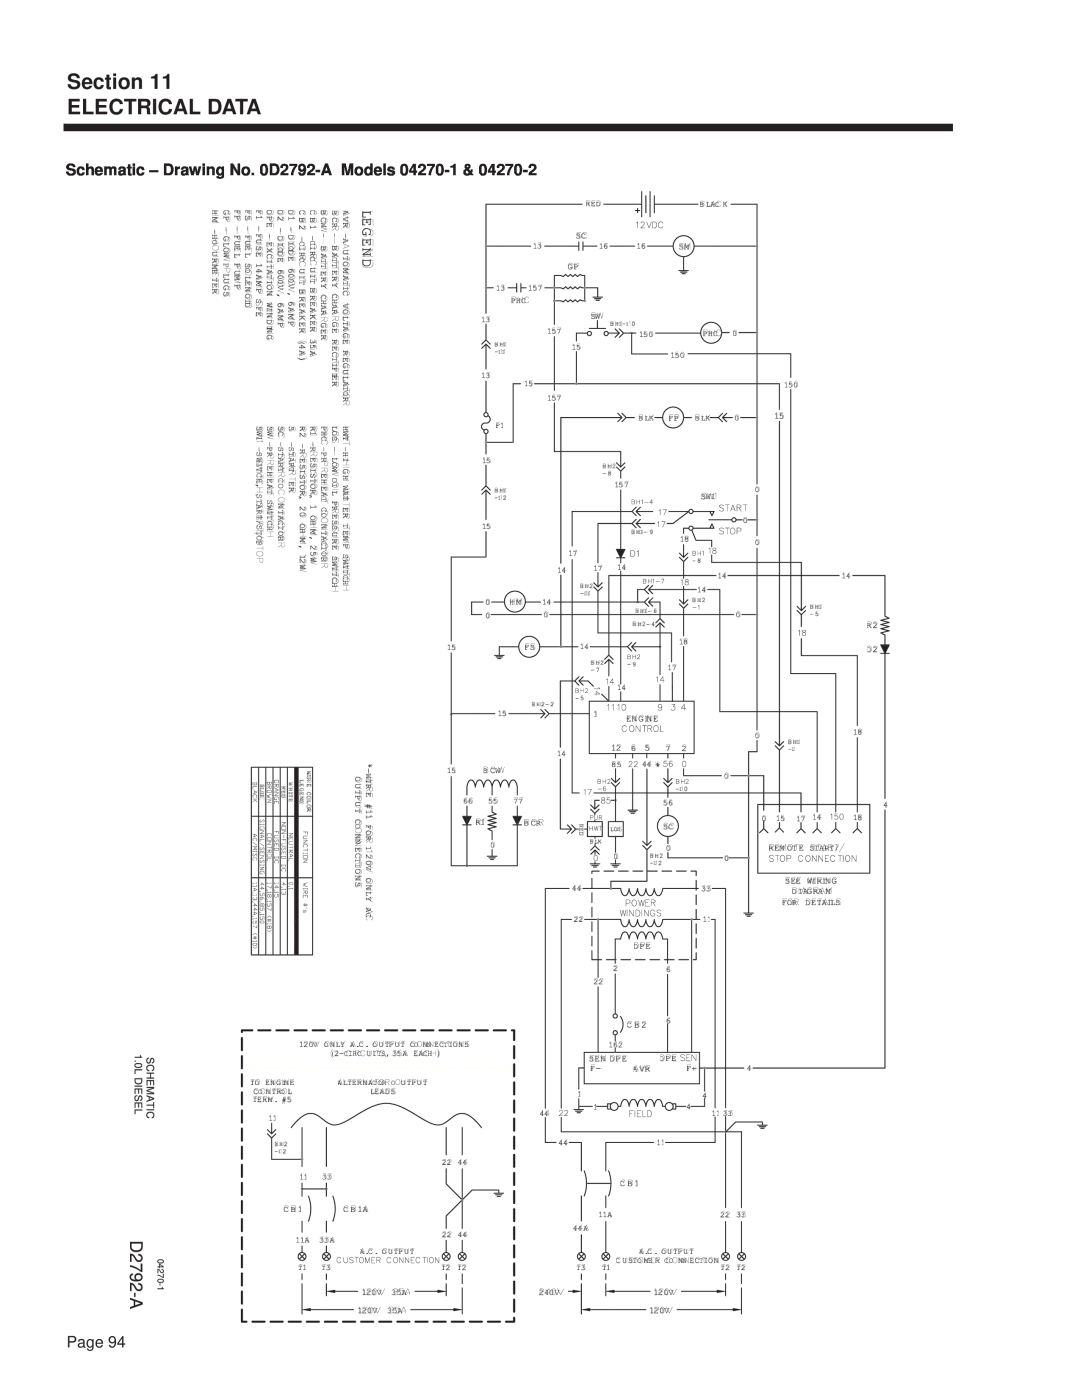 Guardian Technologies manual Section ELECTRICAL DATA, Schematic - Drawing No. 0D2792-A Models 04270-1, Page 